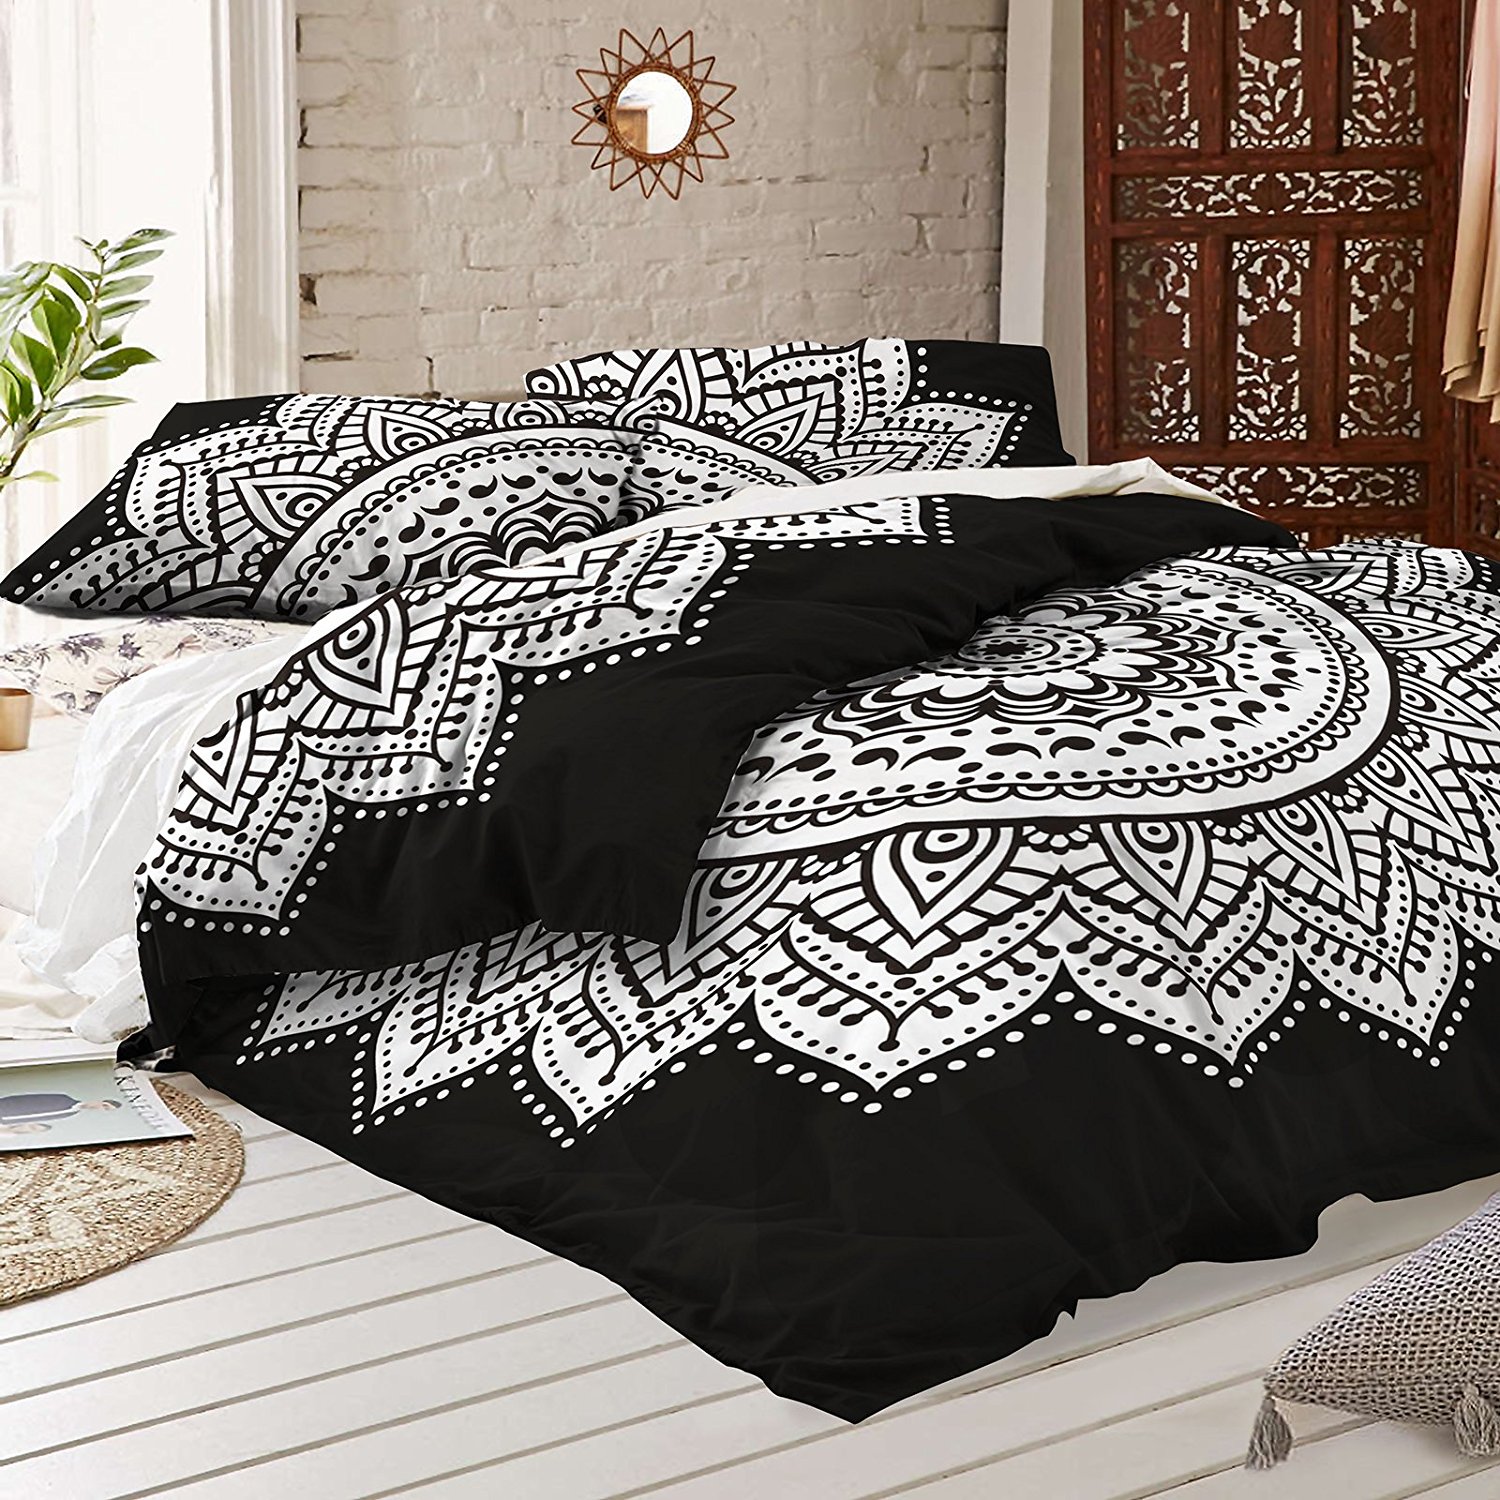 Black and white Mandala Duvet Cover With Two Pillow Covers - Bohemian Doona set- Indian Reversible Quilt Cover By RawyalCrafts